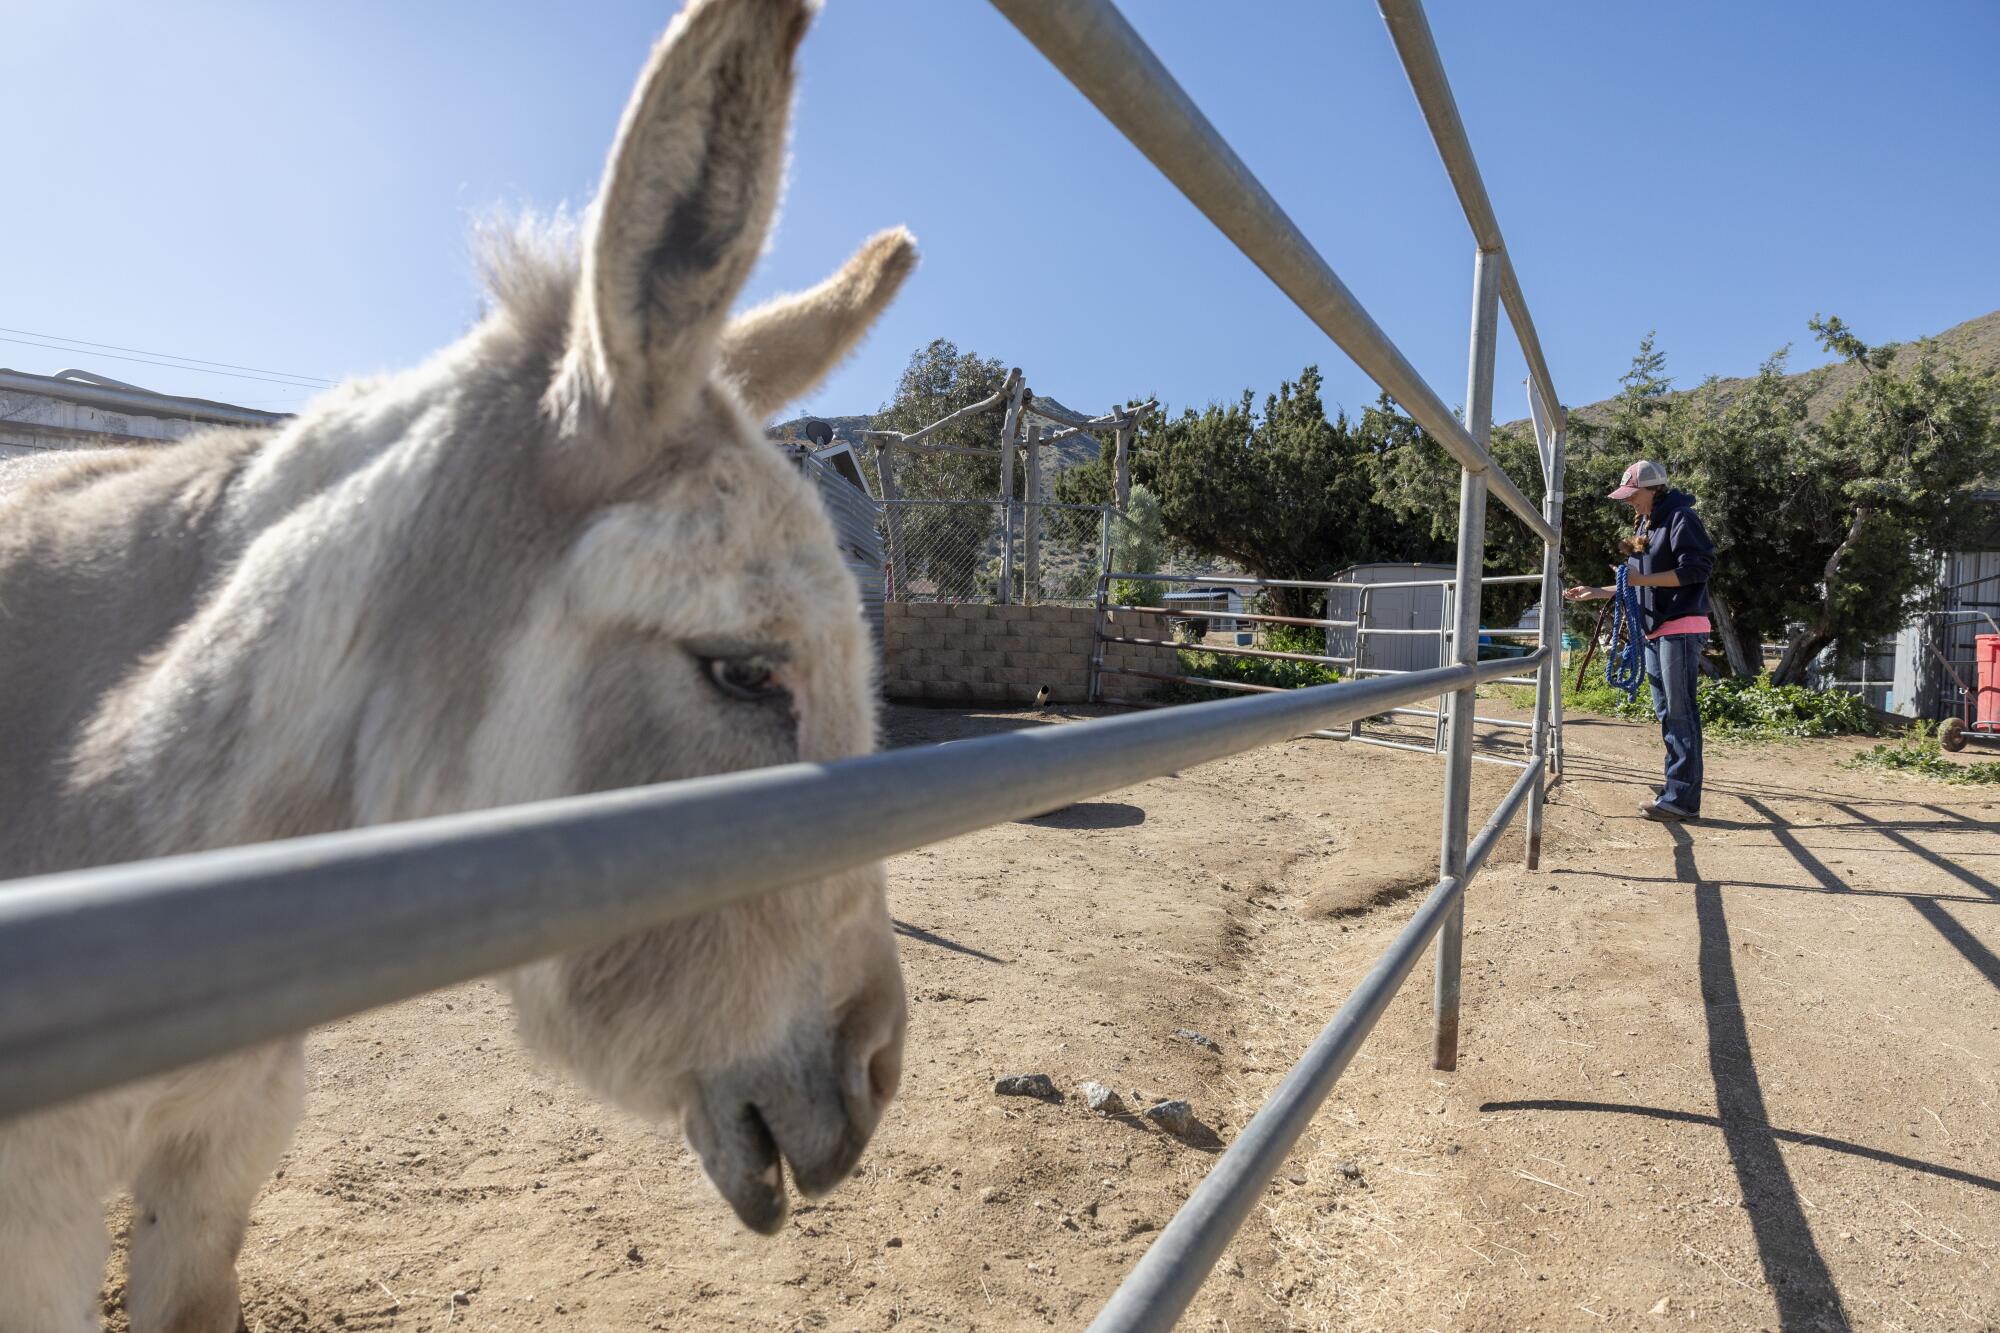 A beige and white donkey behind a fence